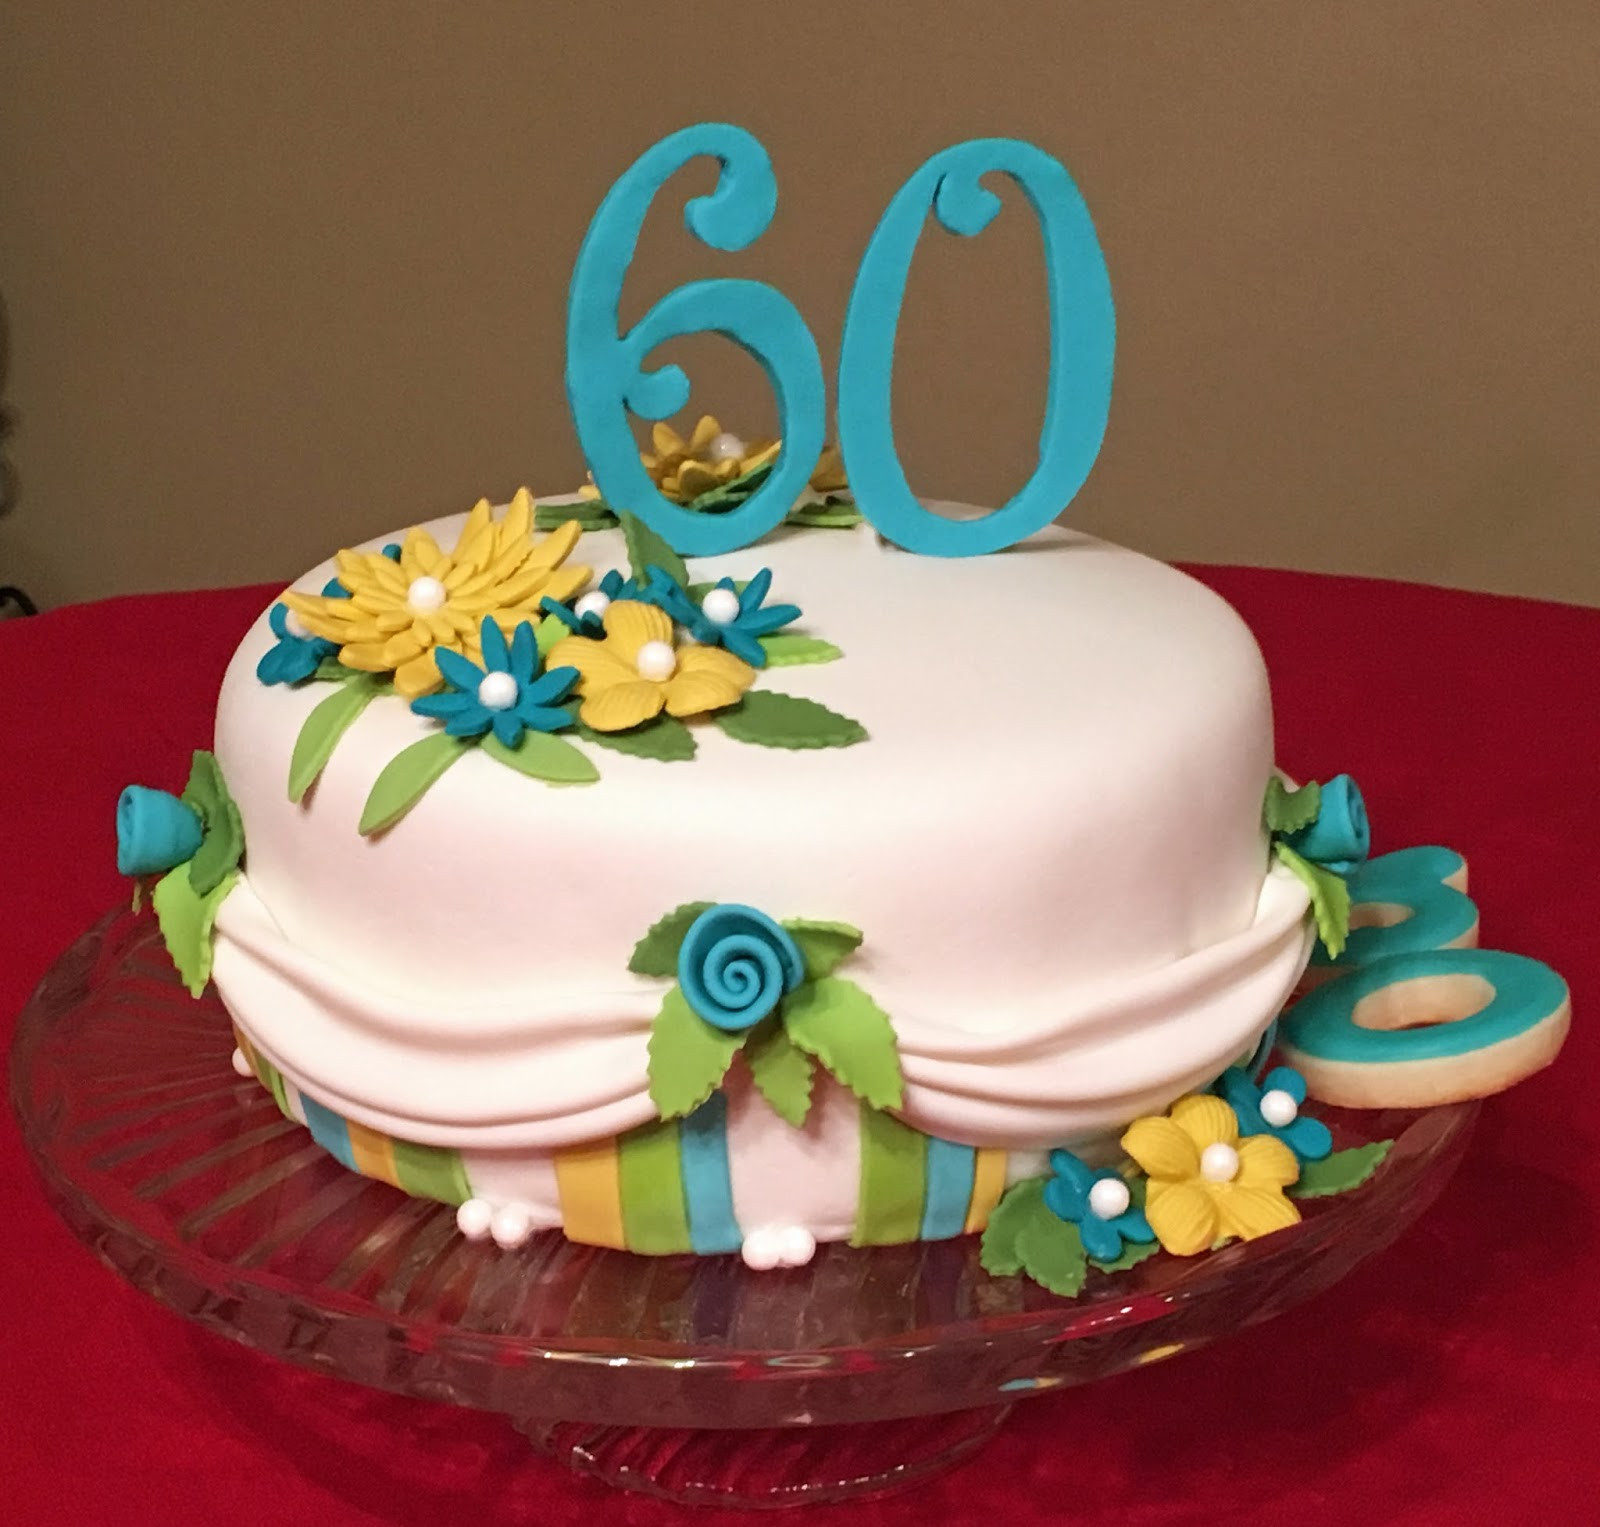 60th Birthday Cakes For Her
 The Bake More 60th Birthday Cake